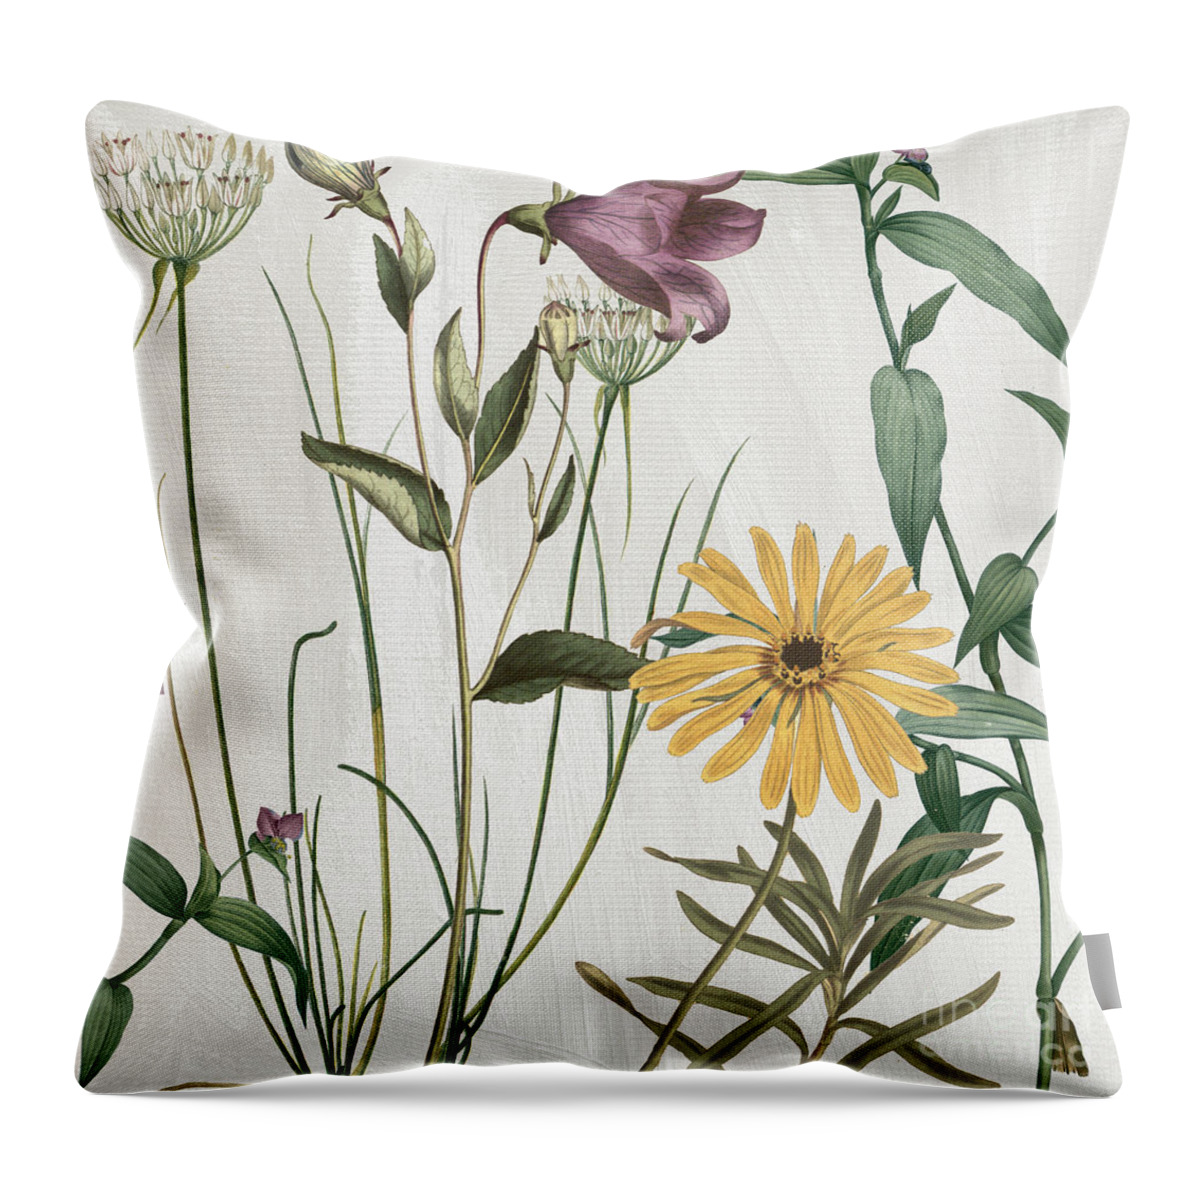 Purple Crocus Throw Pillow featuring the painting Softly Crocus and Daisy by Mindy Sommers